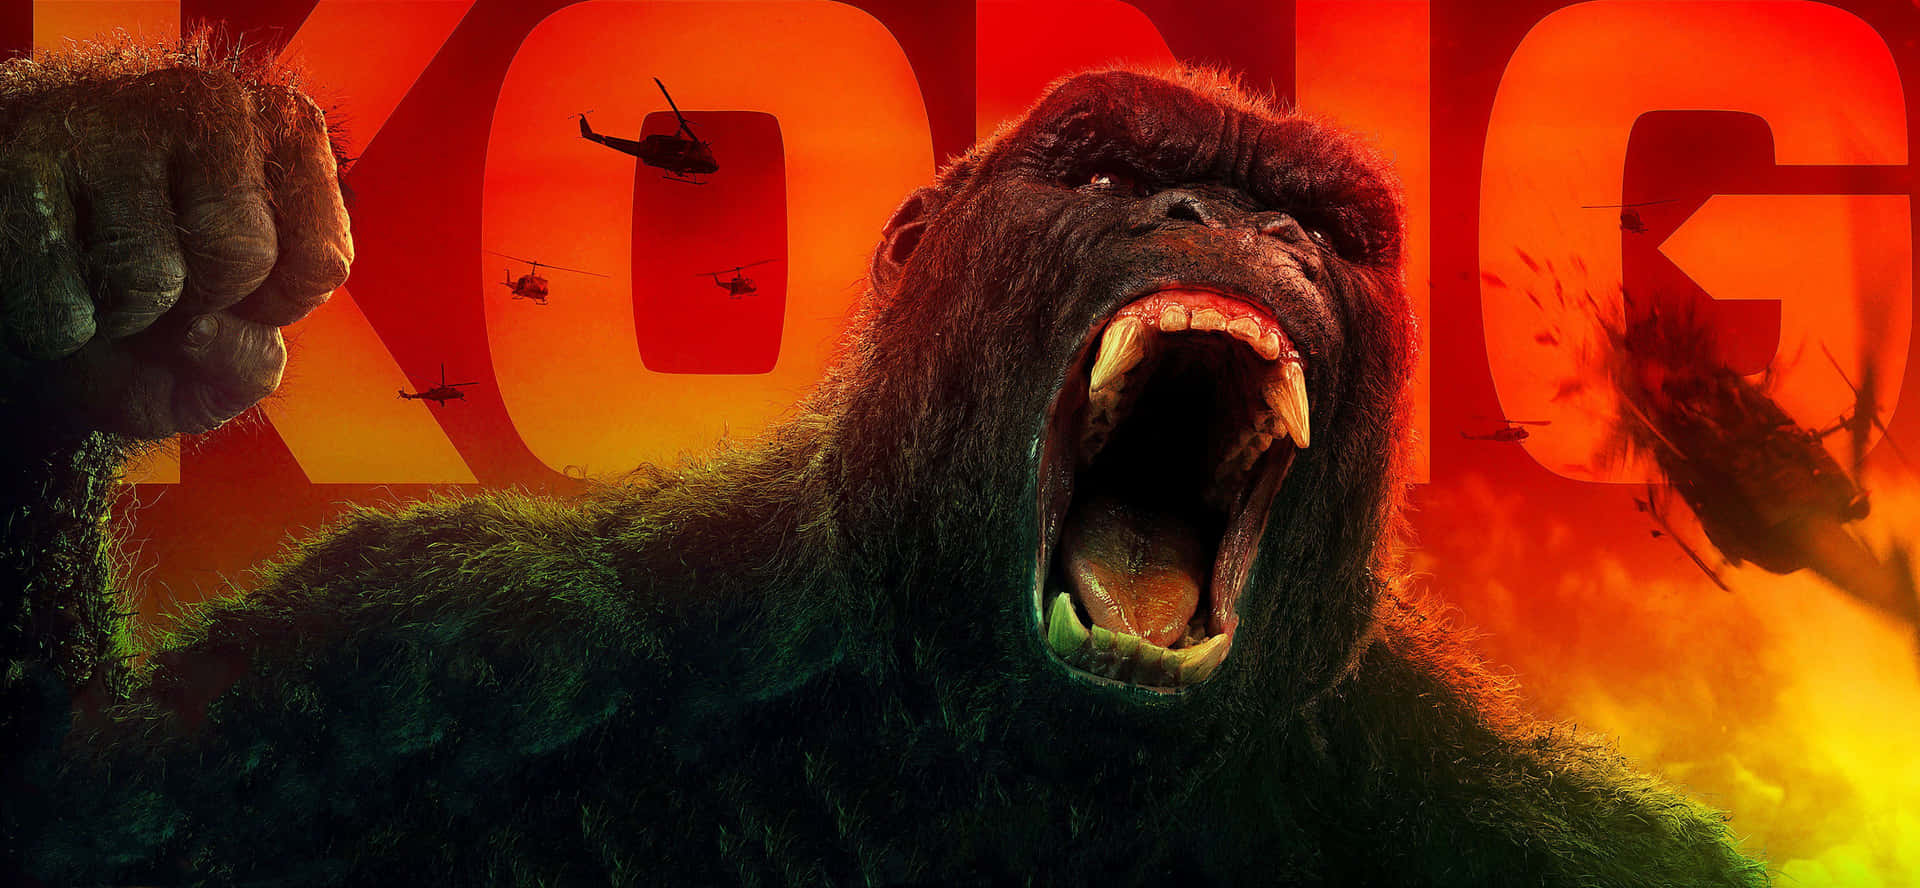 “King Kong roars to life in this ultra-high definition 4K image.” Wallpaper